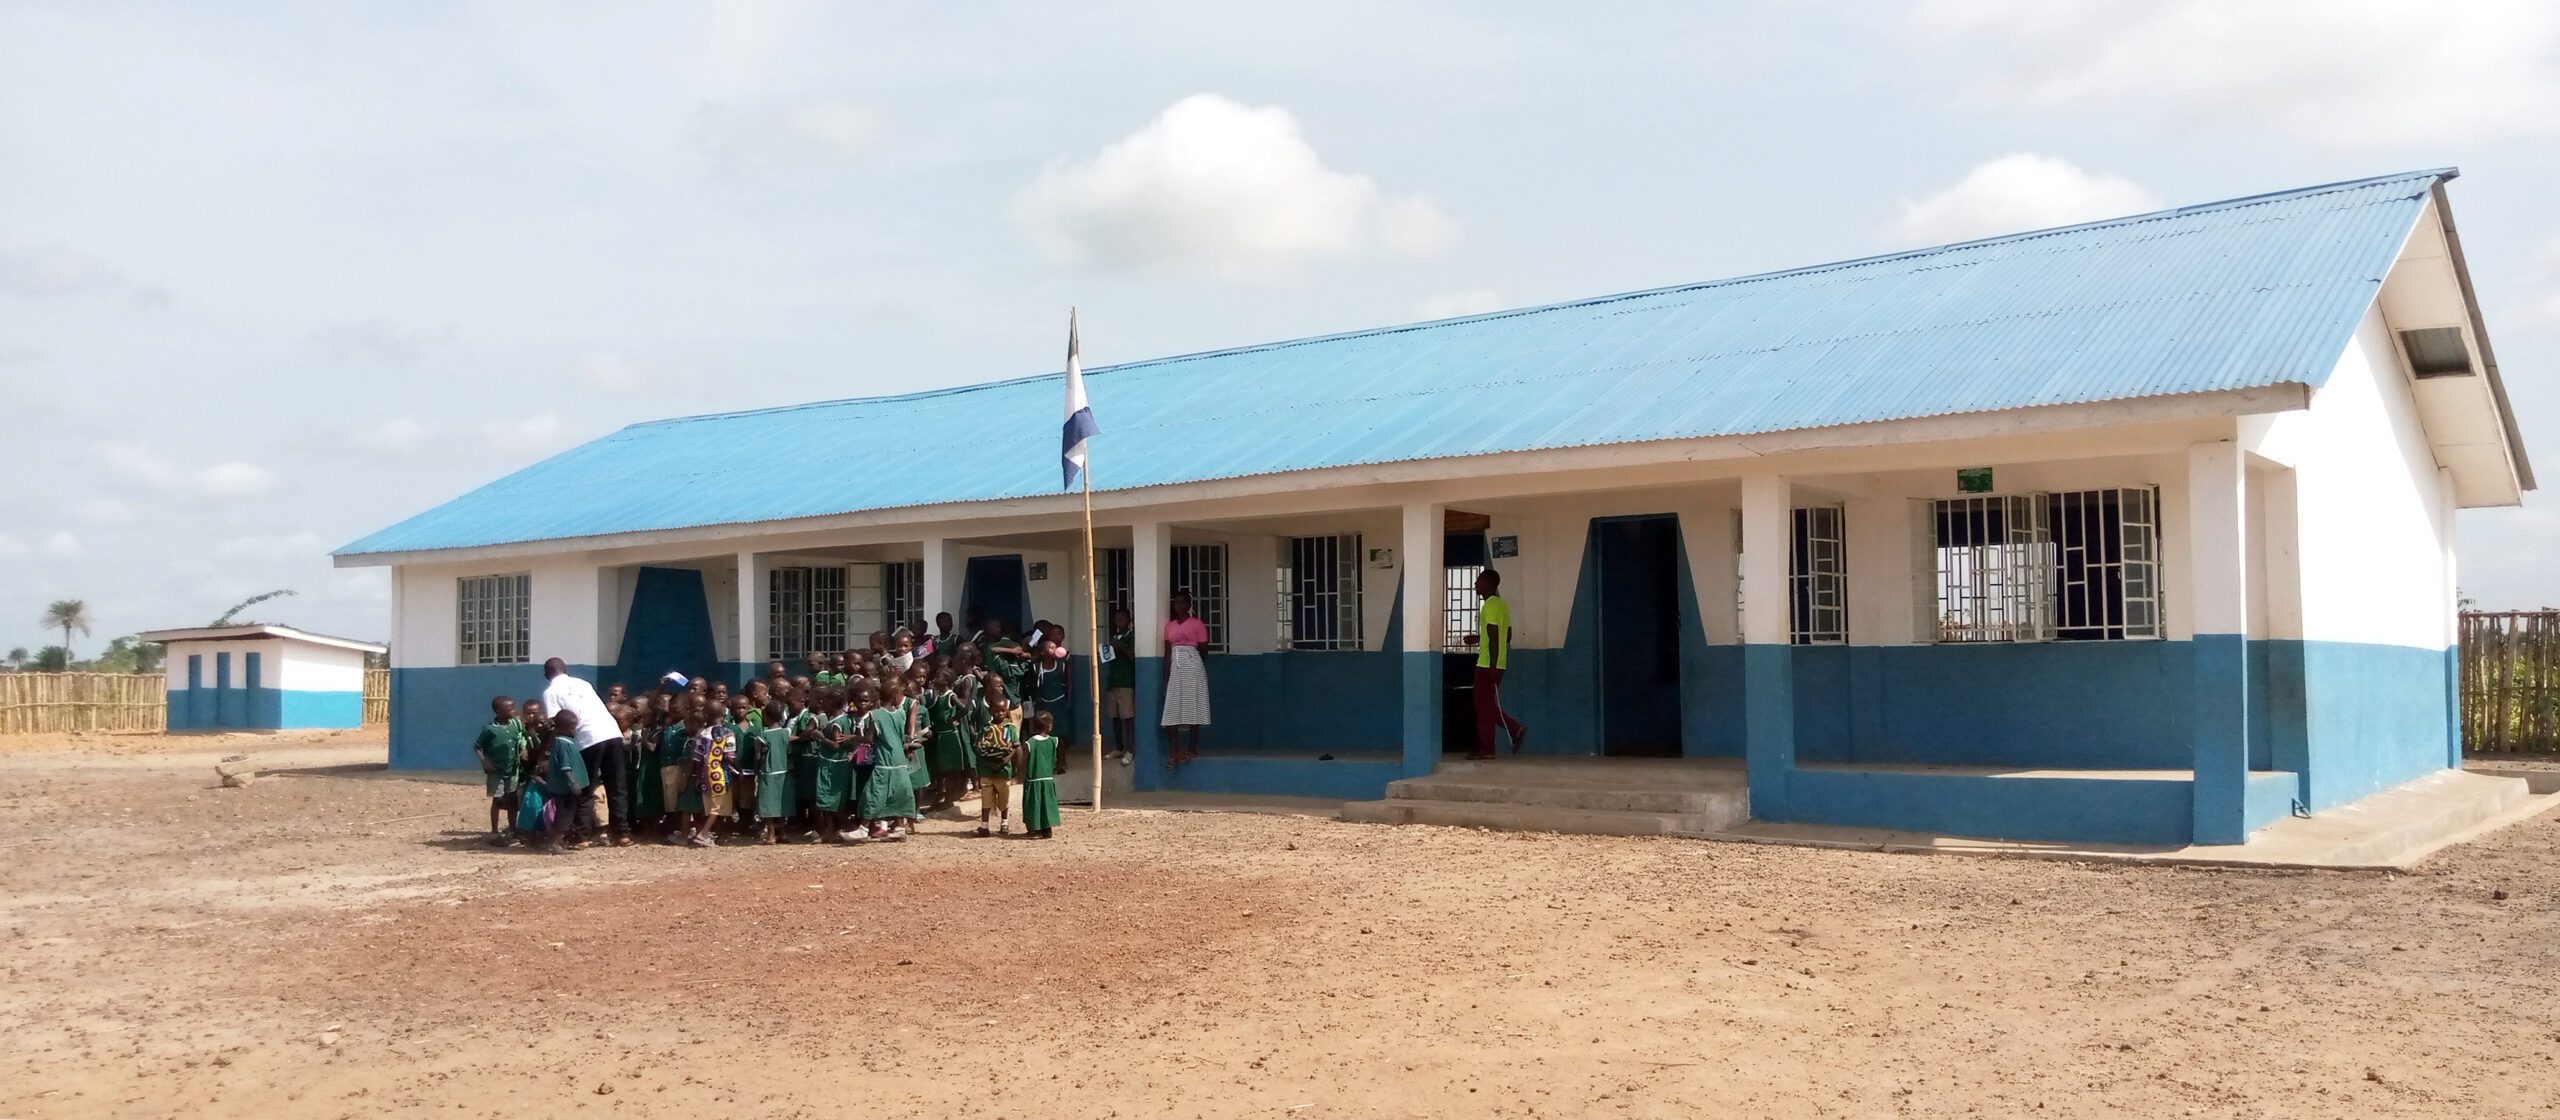 The newly-built pre-school in Port Loko District